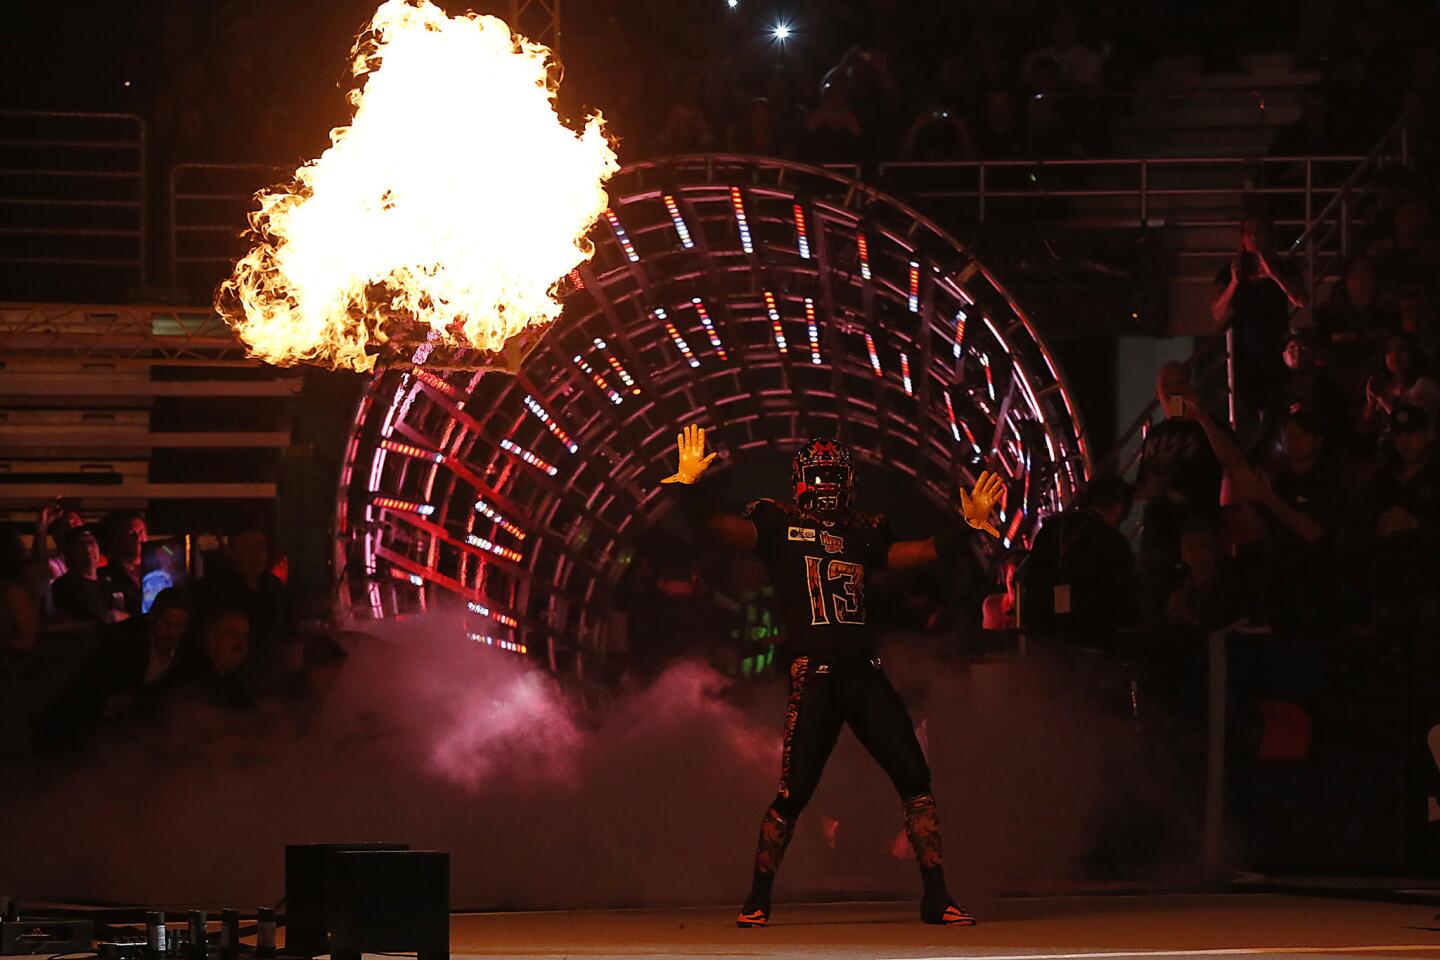 L.A. Kiss defensive back Mervin Brookins enters the field during the team's Arena Football League home opener Saturday against the Portland Thunder at the Honda Center.